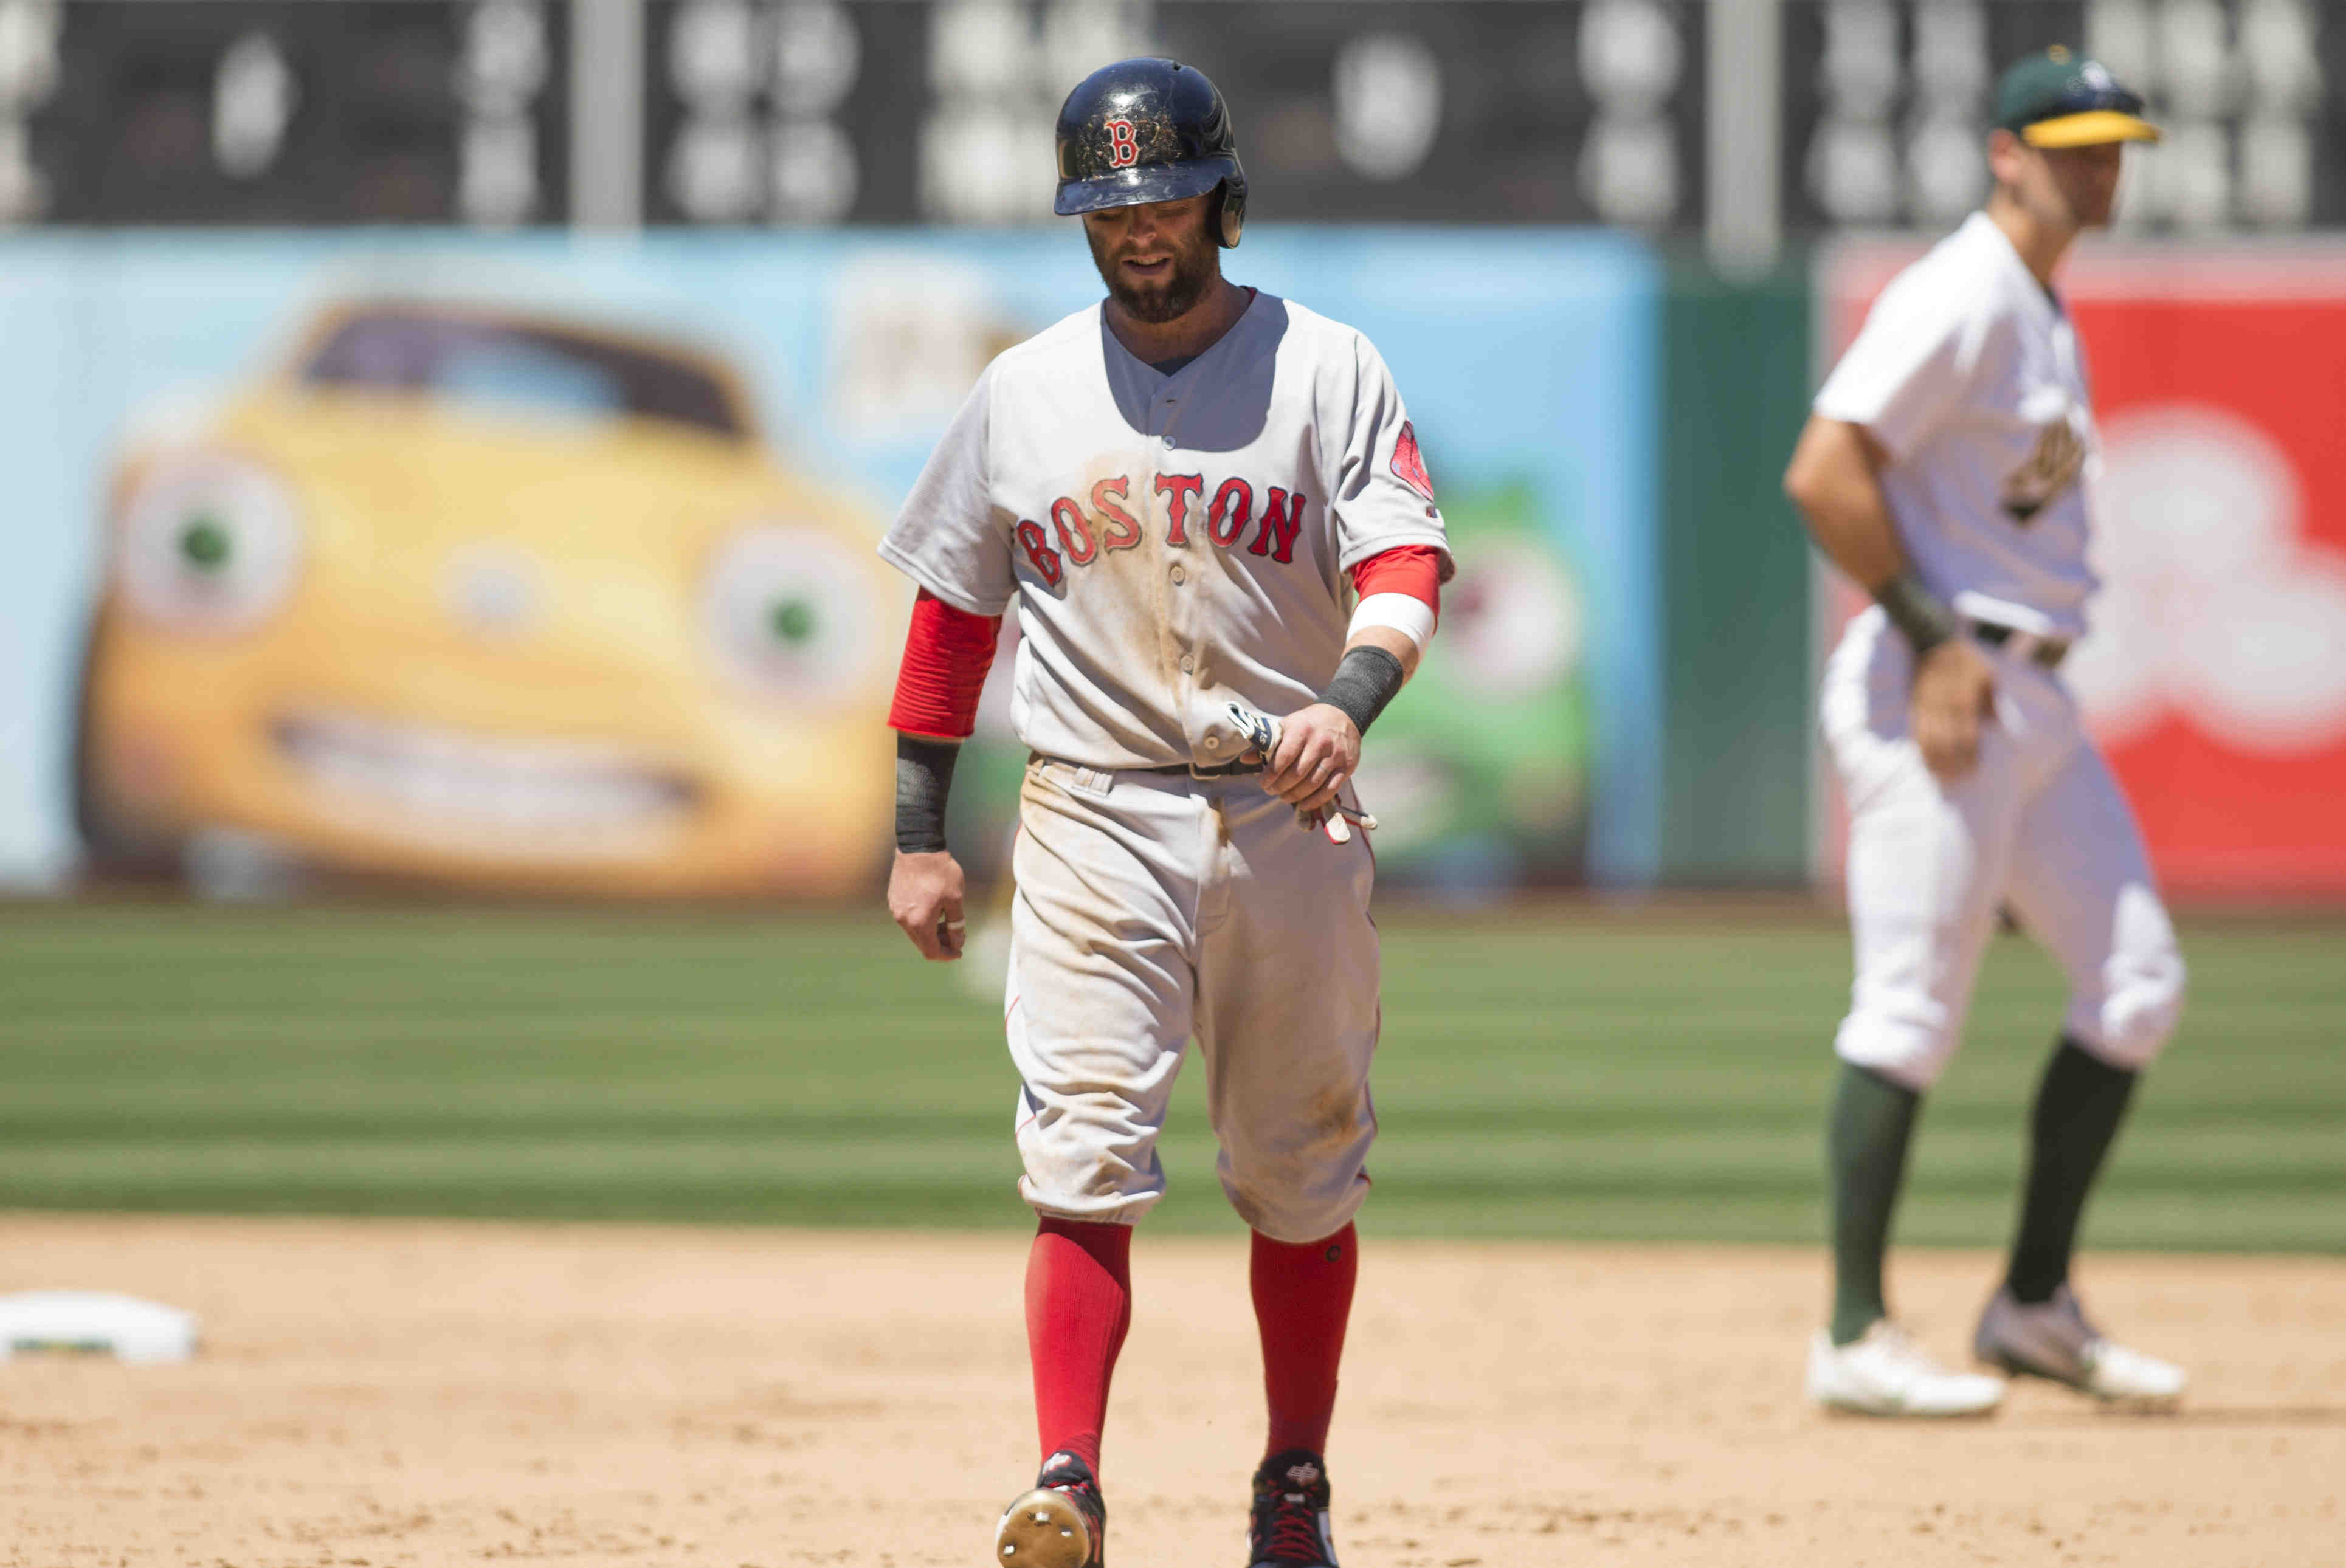 Pony up! Dustin Pedroia nickname questioned – Boston Herald